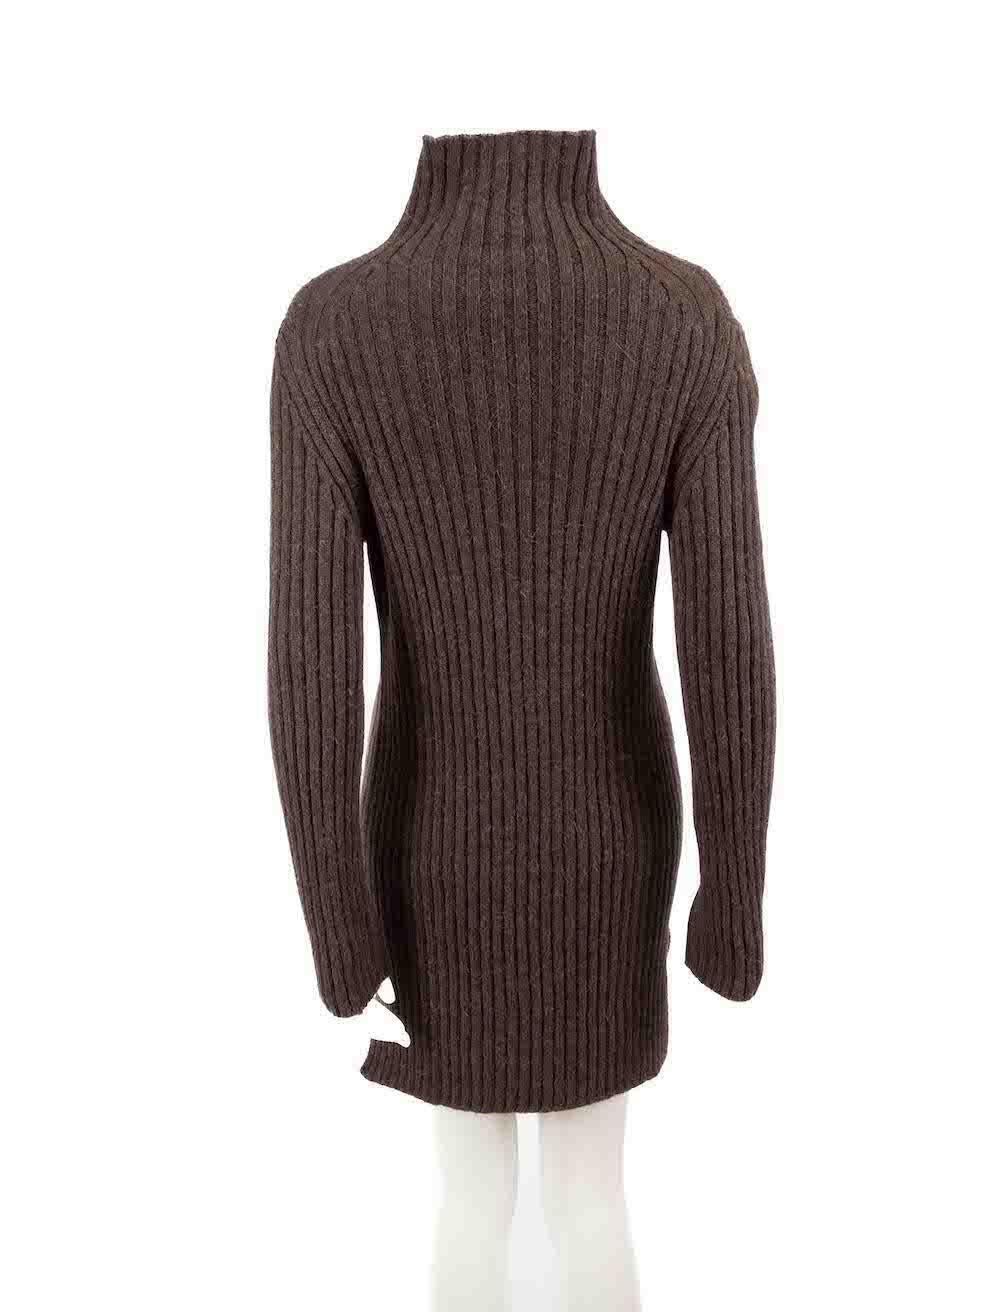 Chloé Brown Wool Turtleneck Knit Dress Size S In Excellent Condition For Sale In London, GB